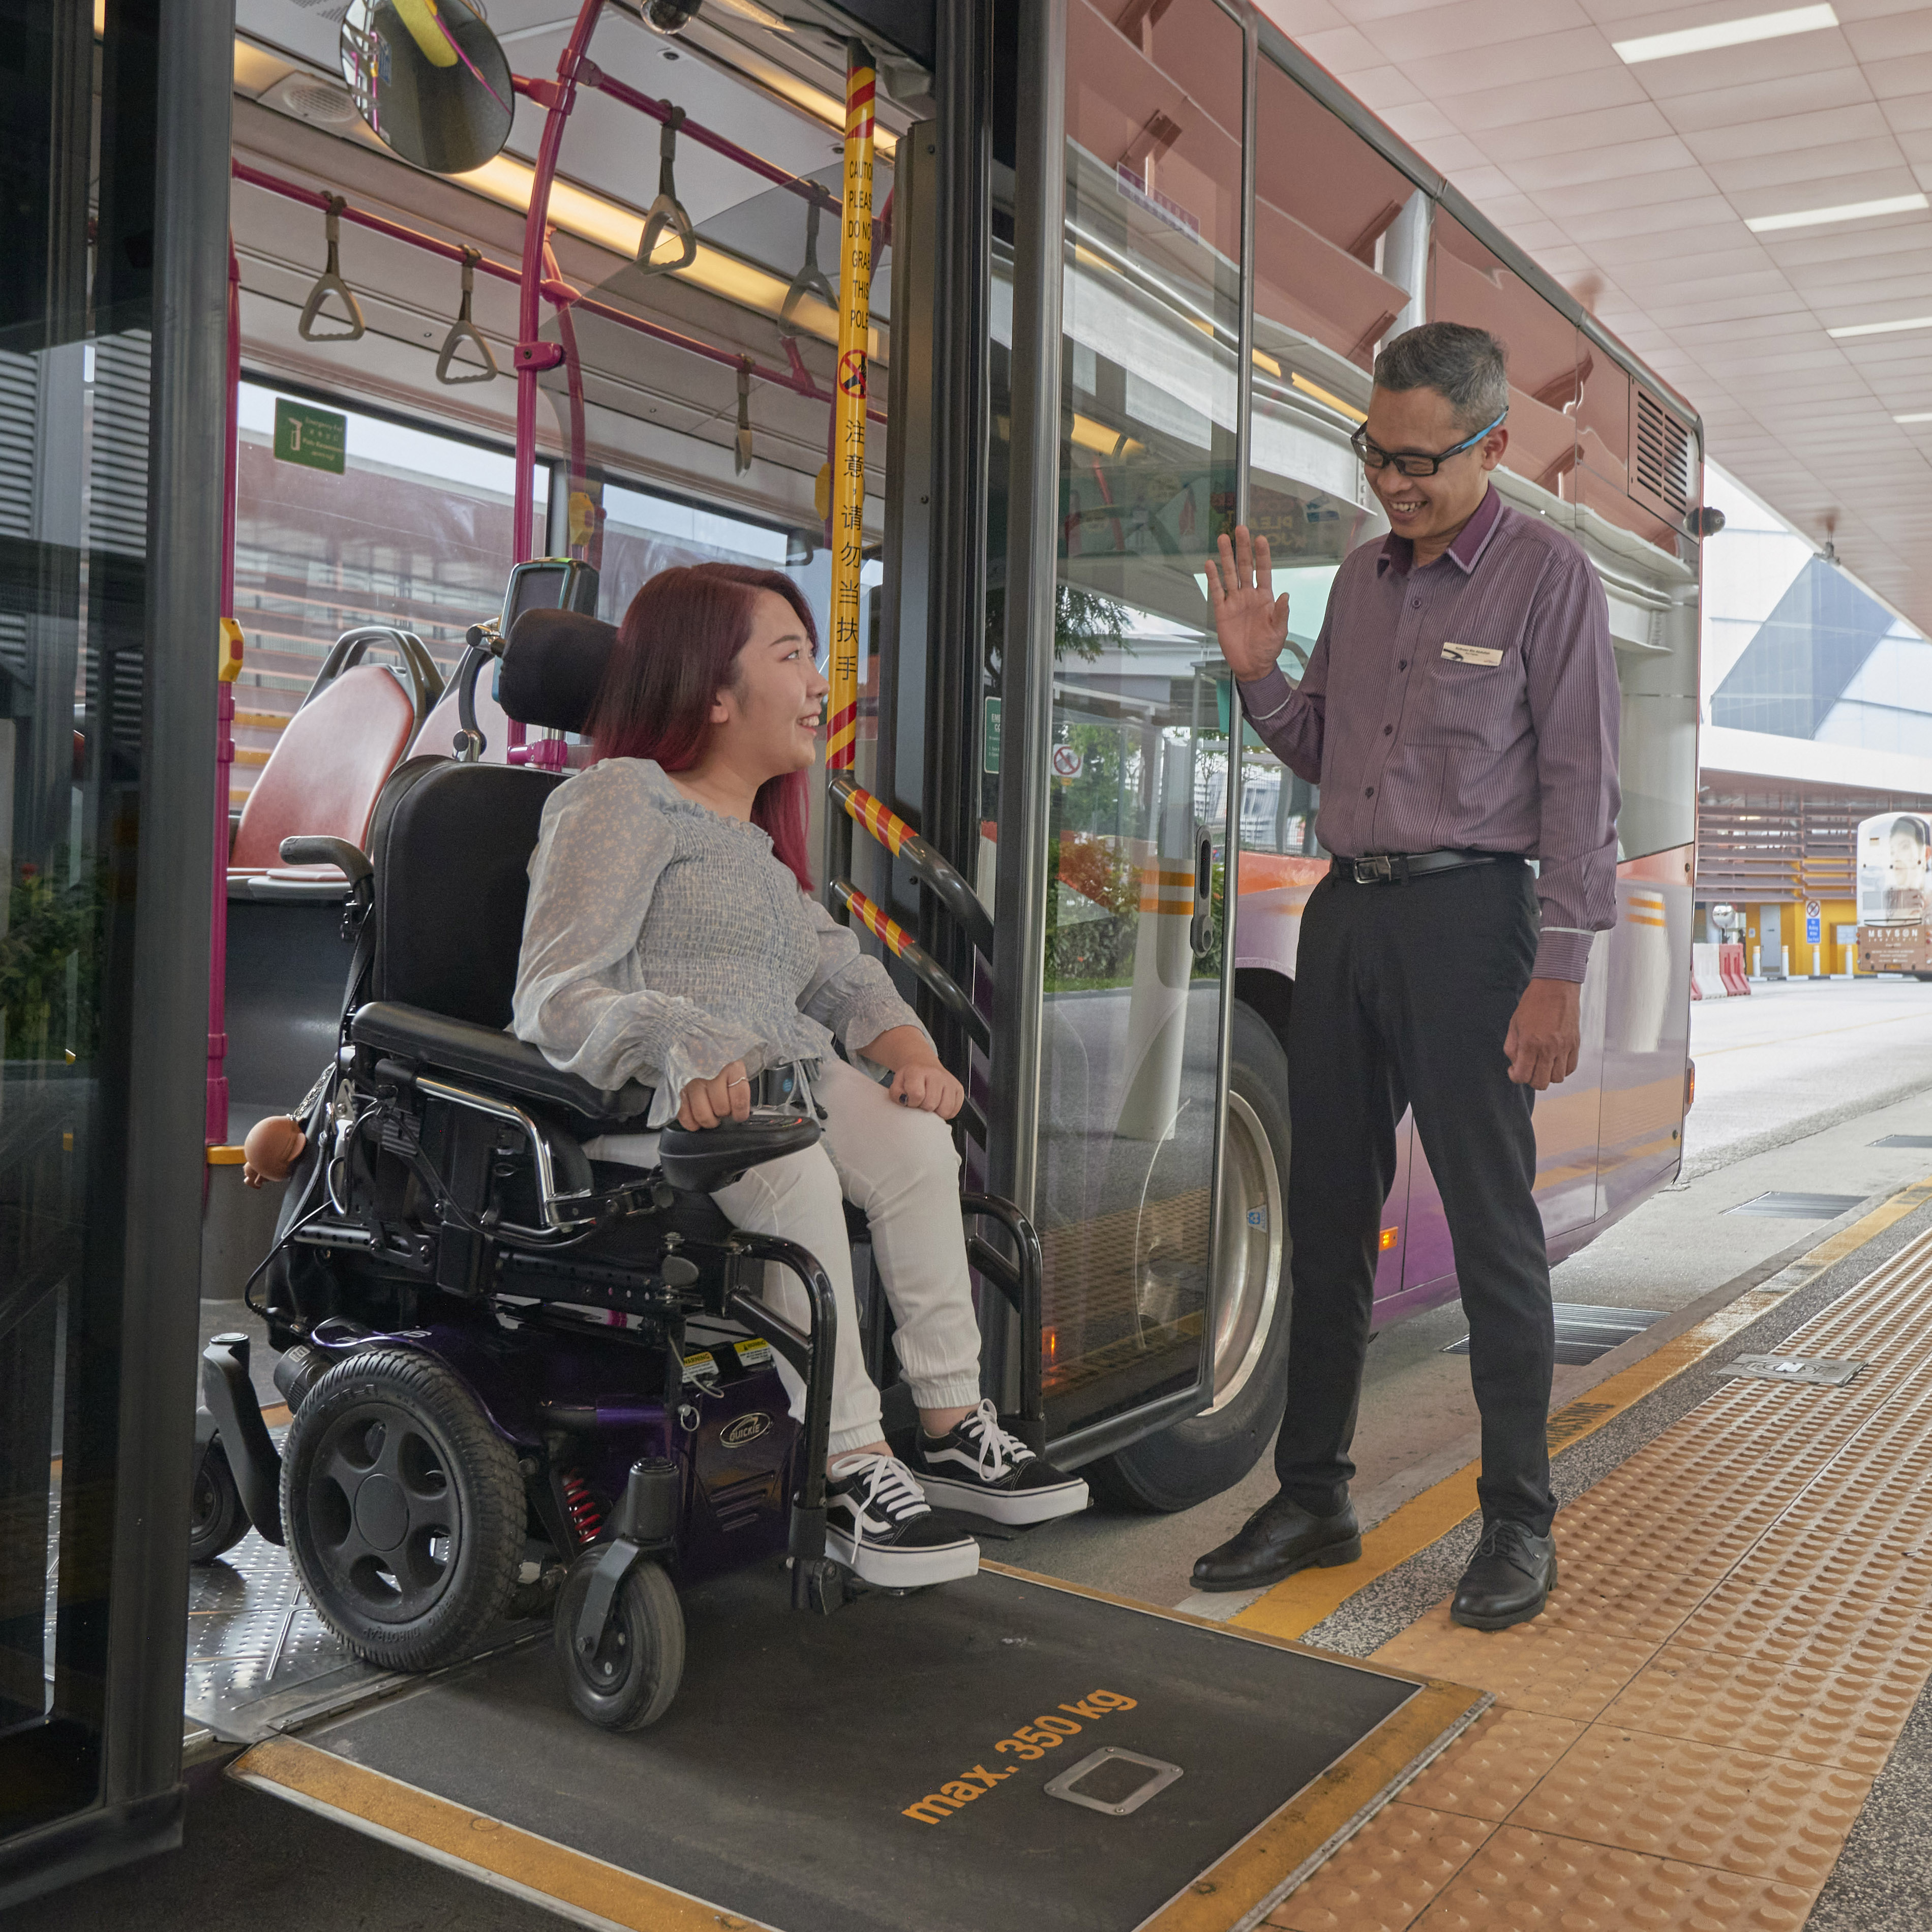 Bus captain standing outside a bus and smiling at a wheelchair user as she alights from the bus via a ramp.